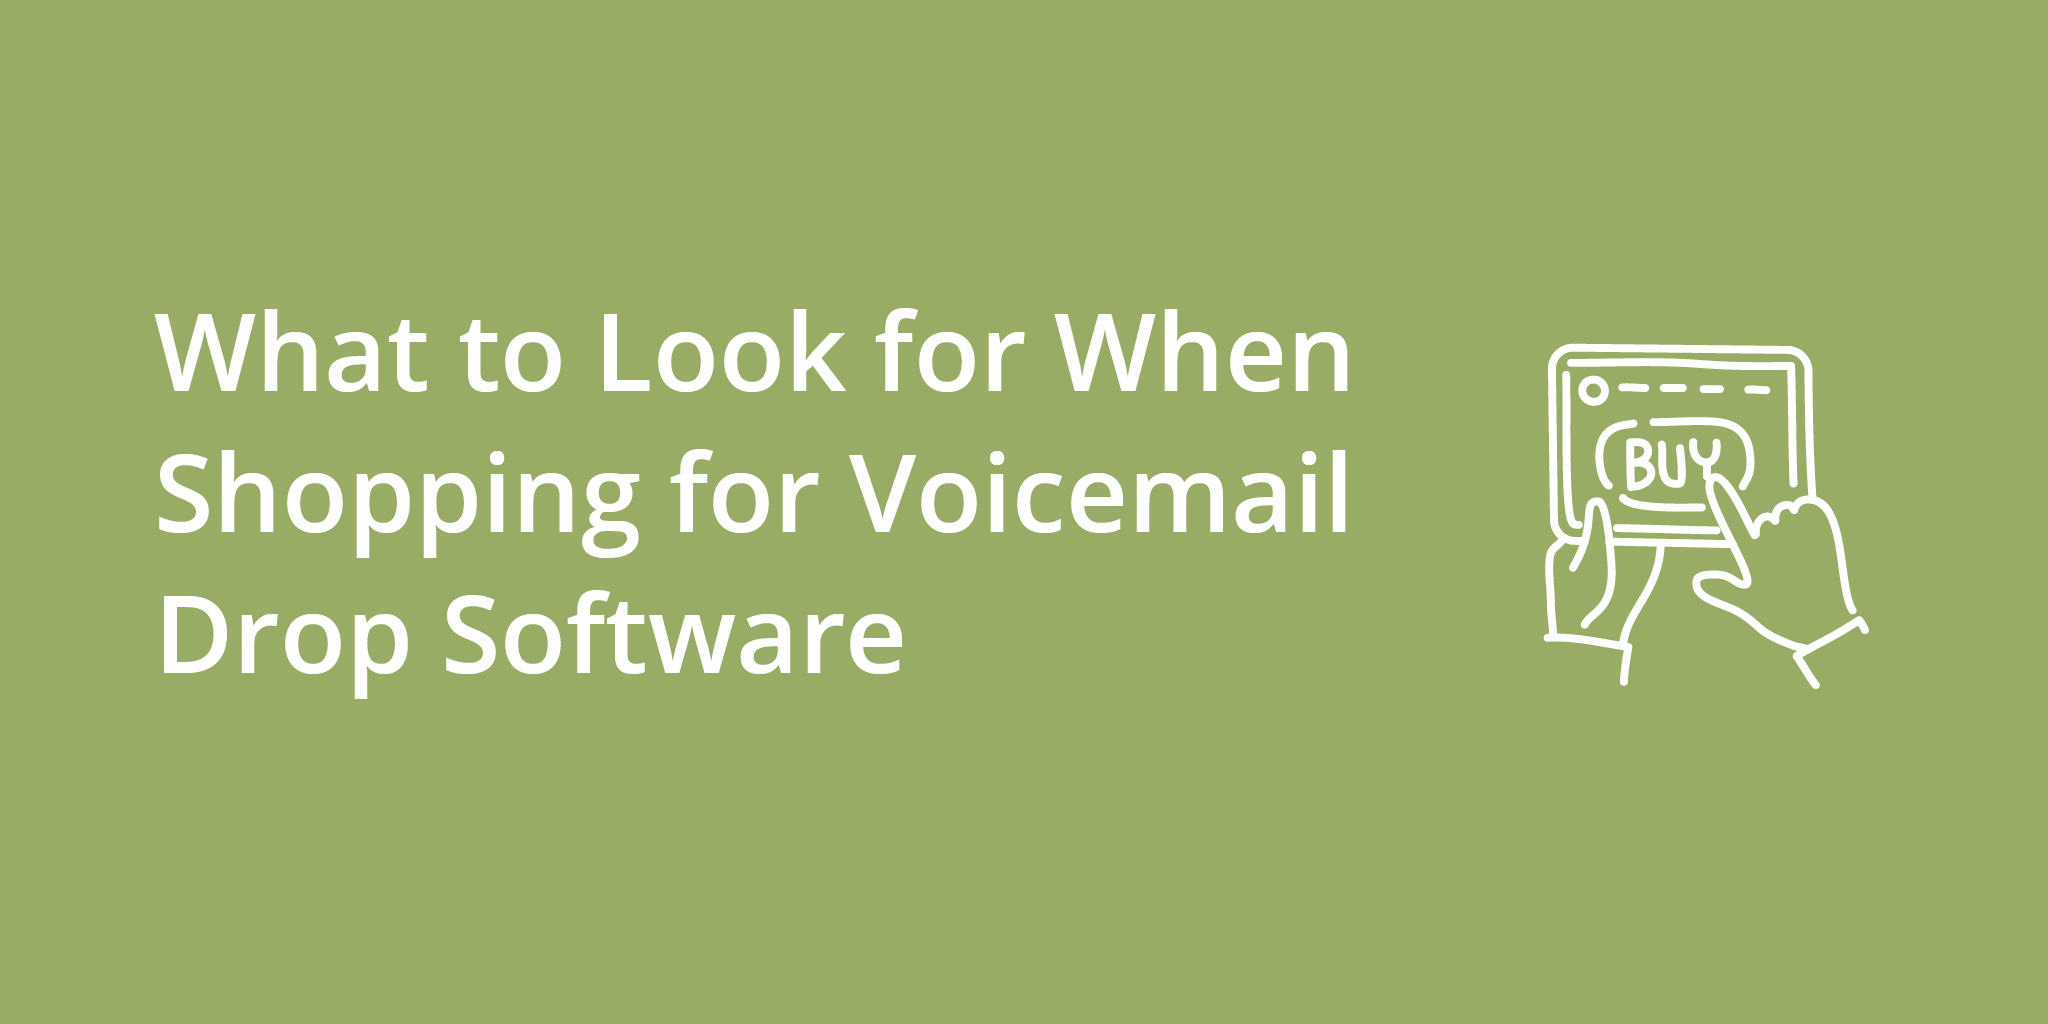 What to Look for When Shopping for Voicemail Drop Software | Telephones for business